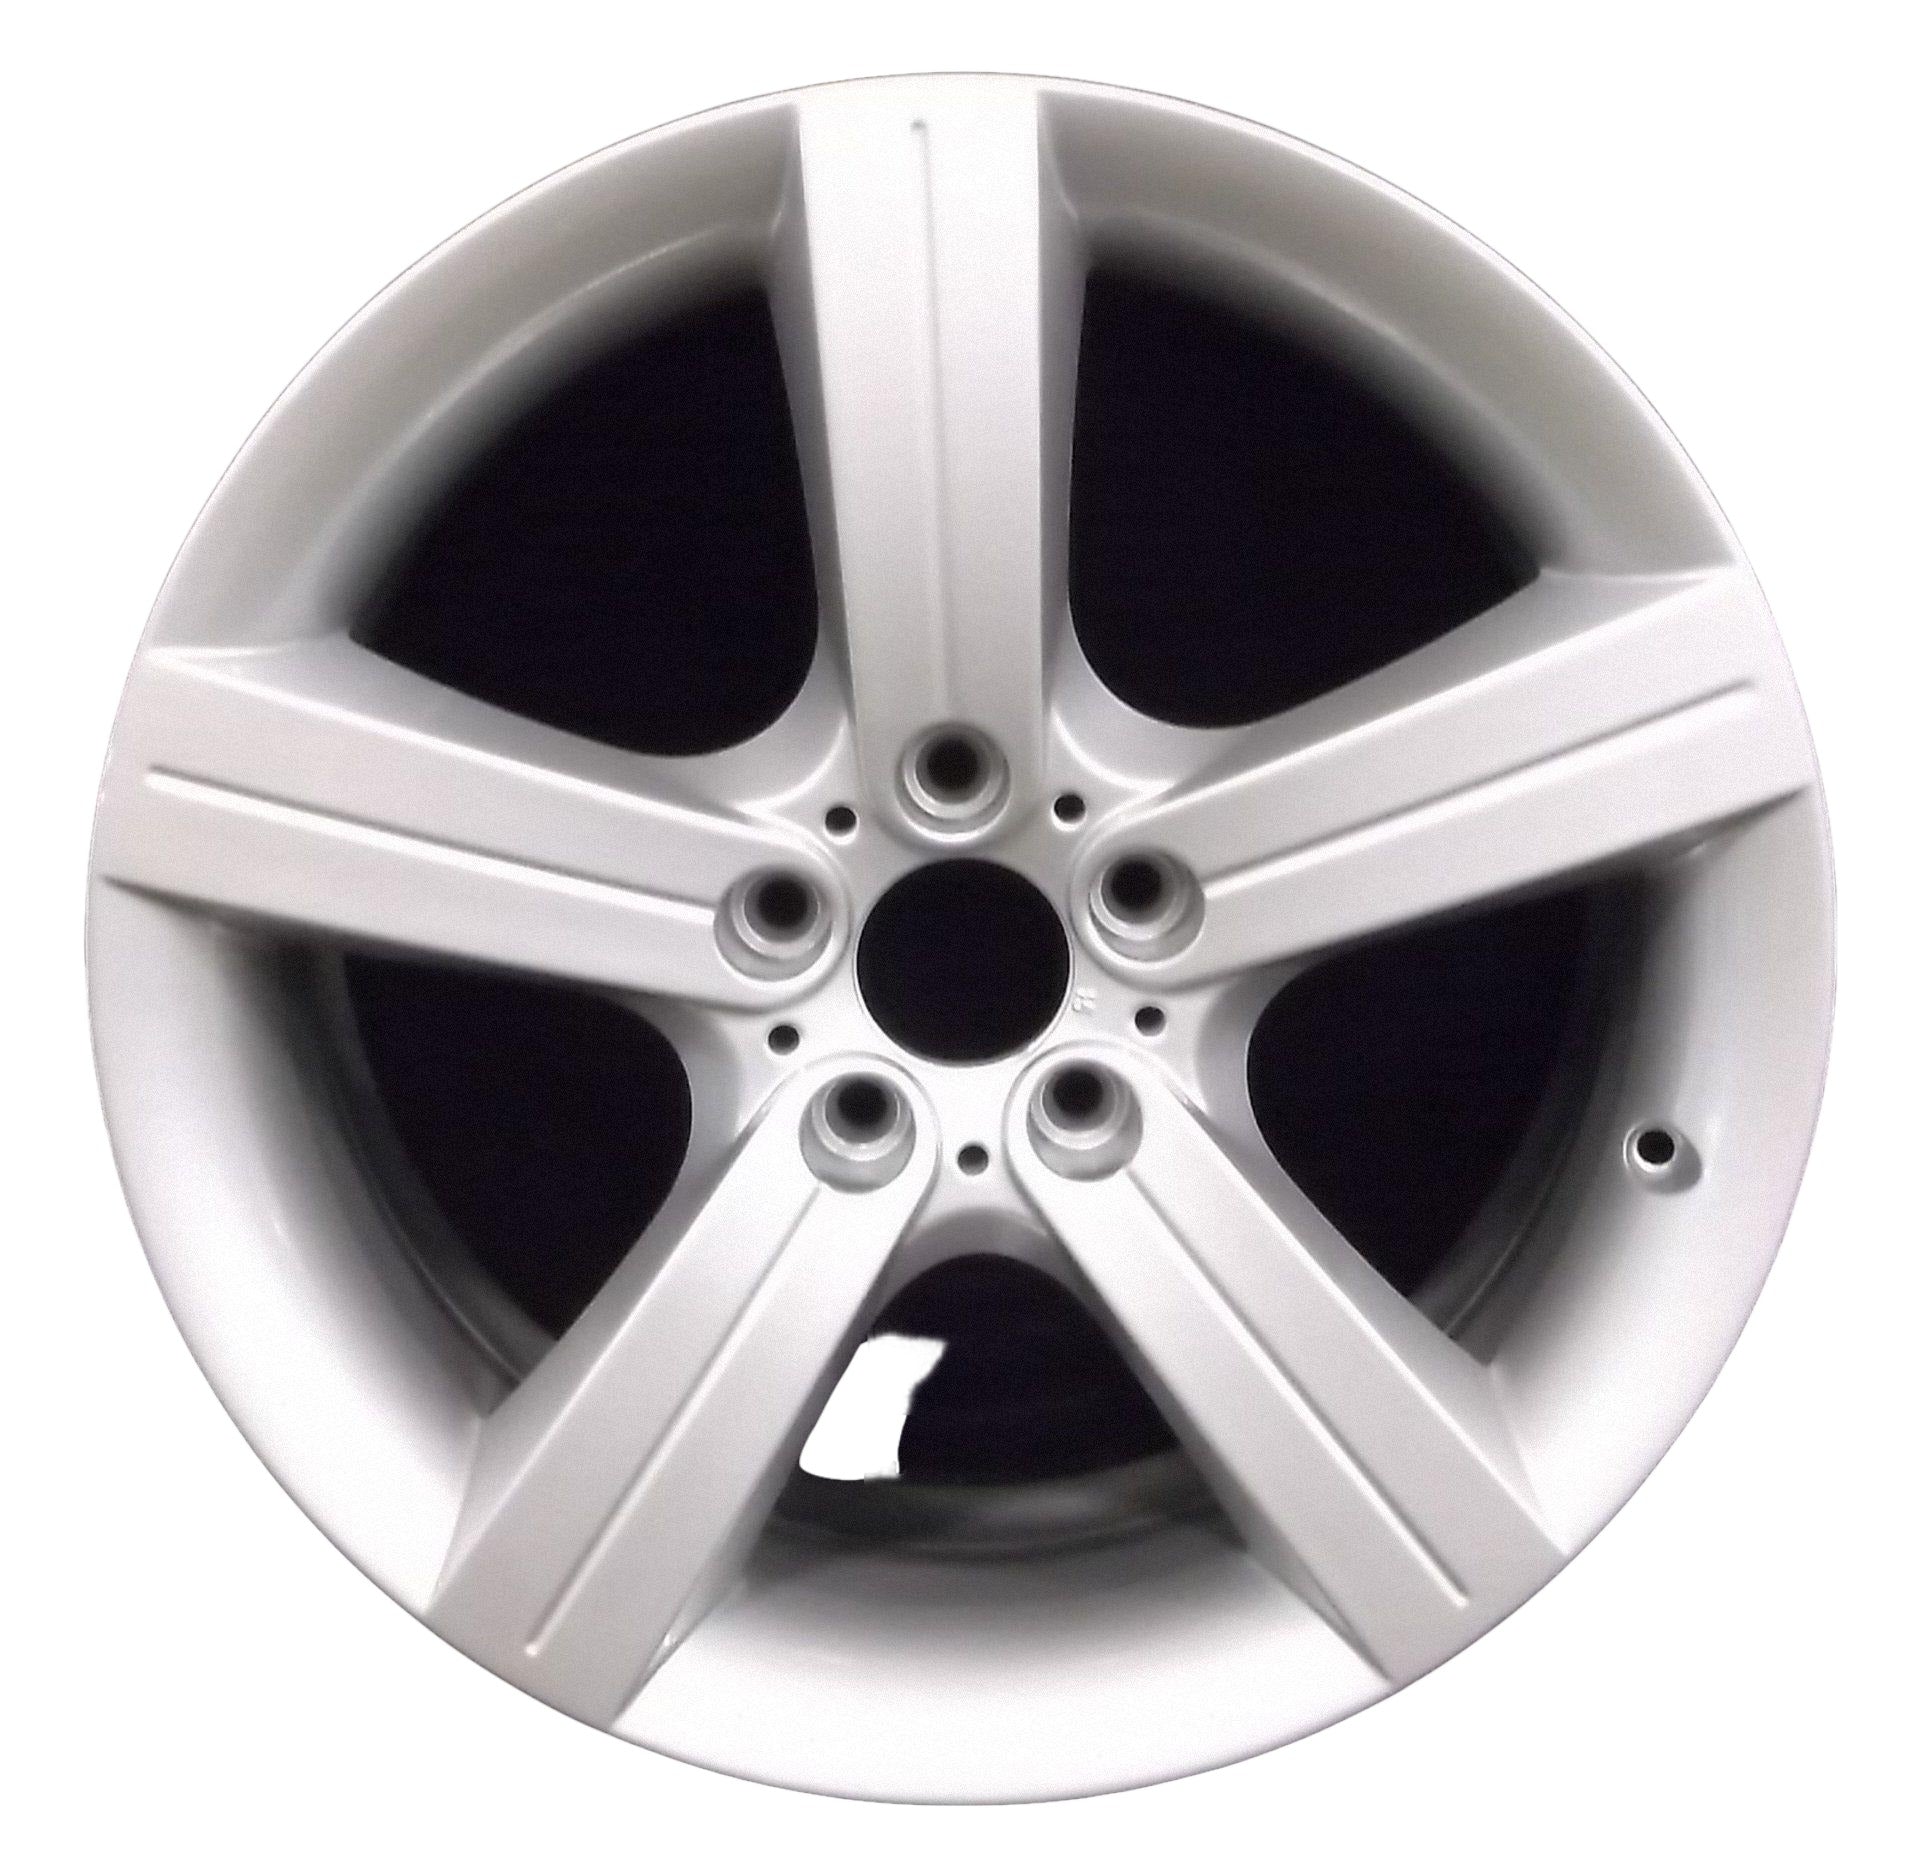 BMW 323i  2006, 2007, 2008, 2009, 2010, 2011, 2012 Factory OEM Car Wheel Size 19x9 Alloy WAO.59599RE.PS15.FF